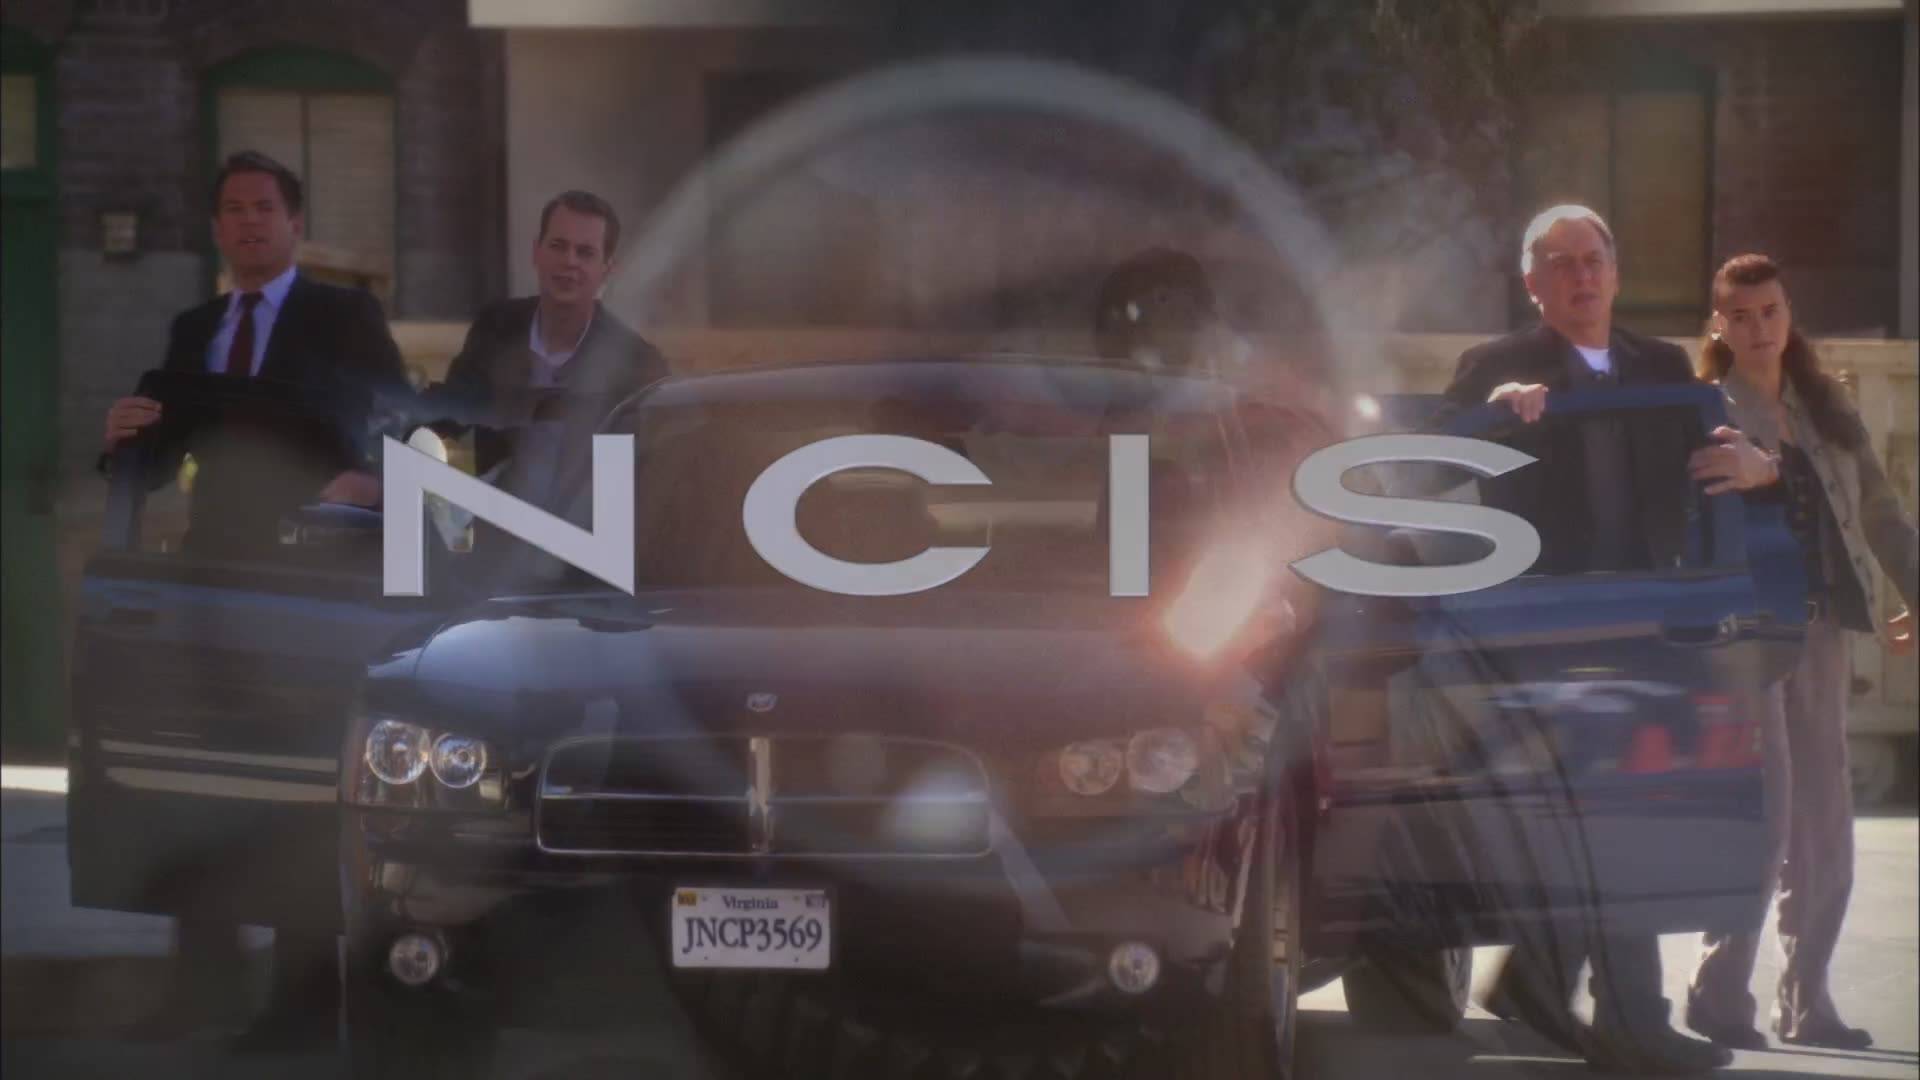 Ncis Logo Wallpaper Related Keywords Suggestions